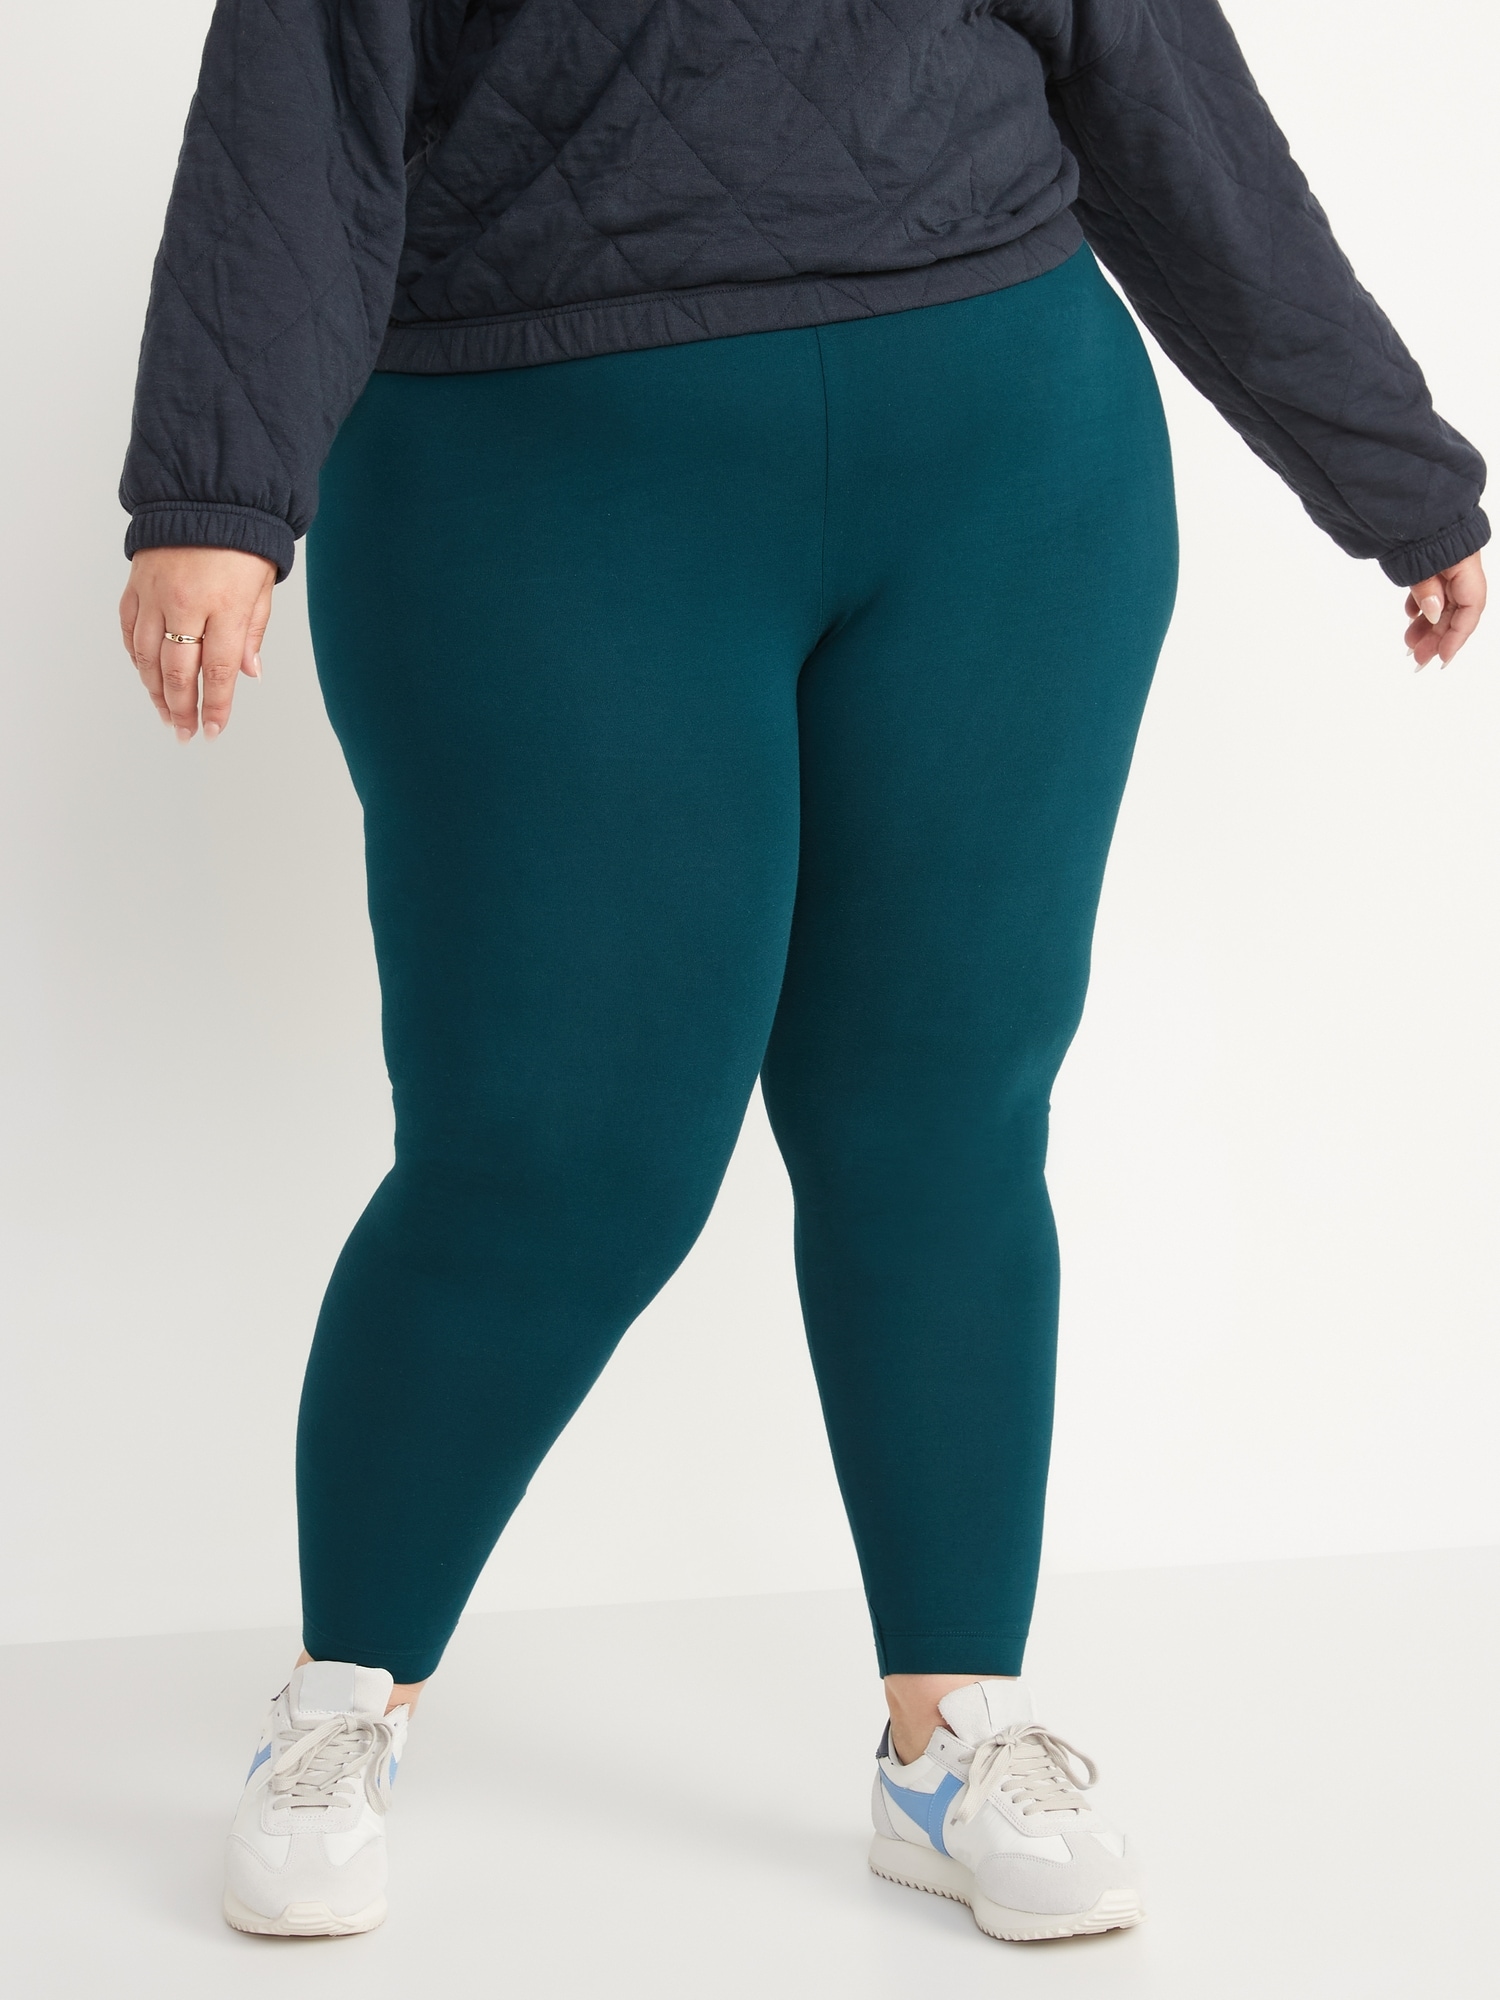 High Waisted Jersey Ankle Leggings For Women Old Navy 8815